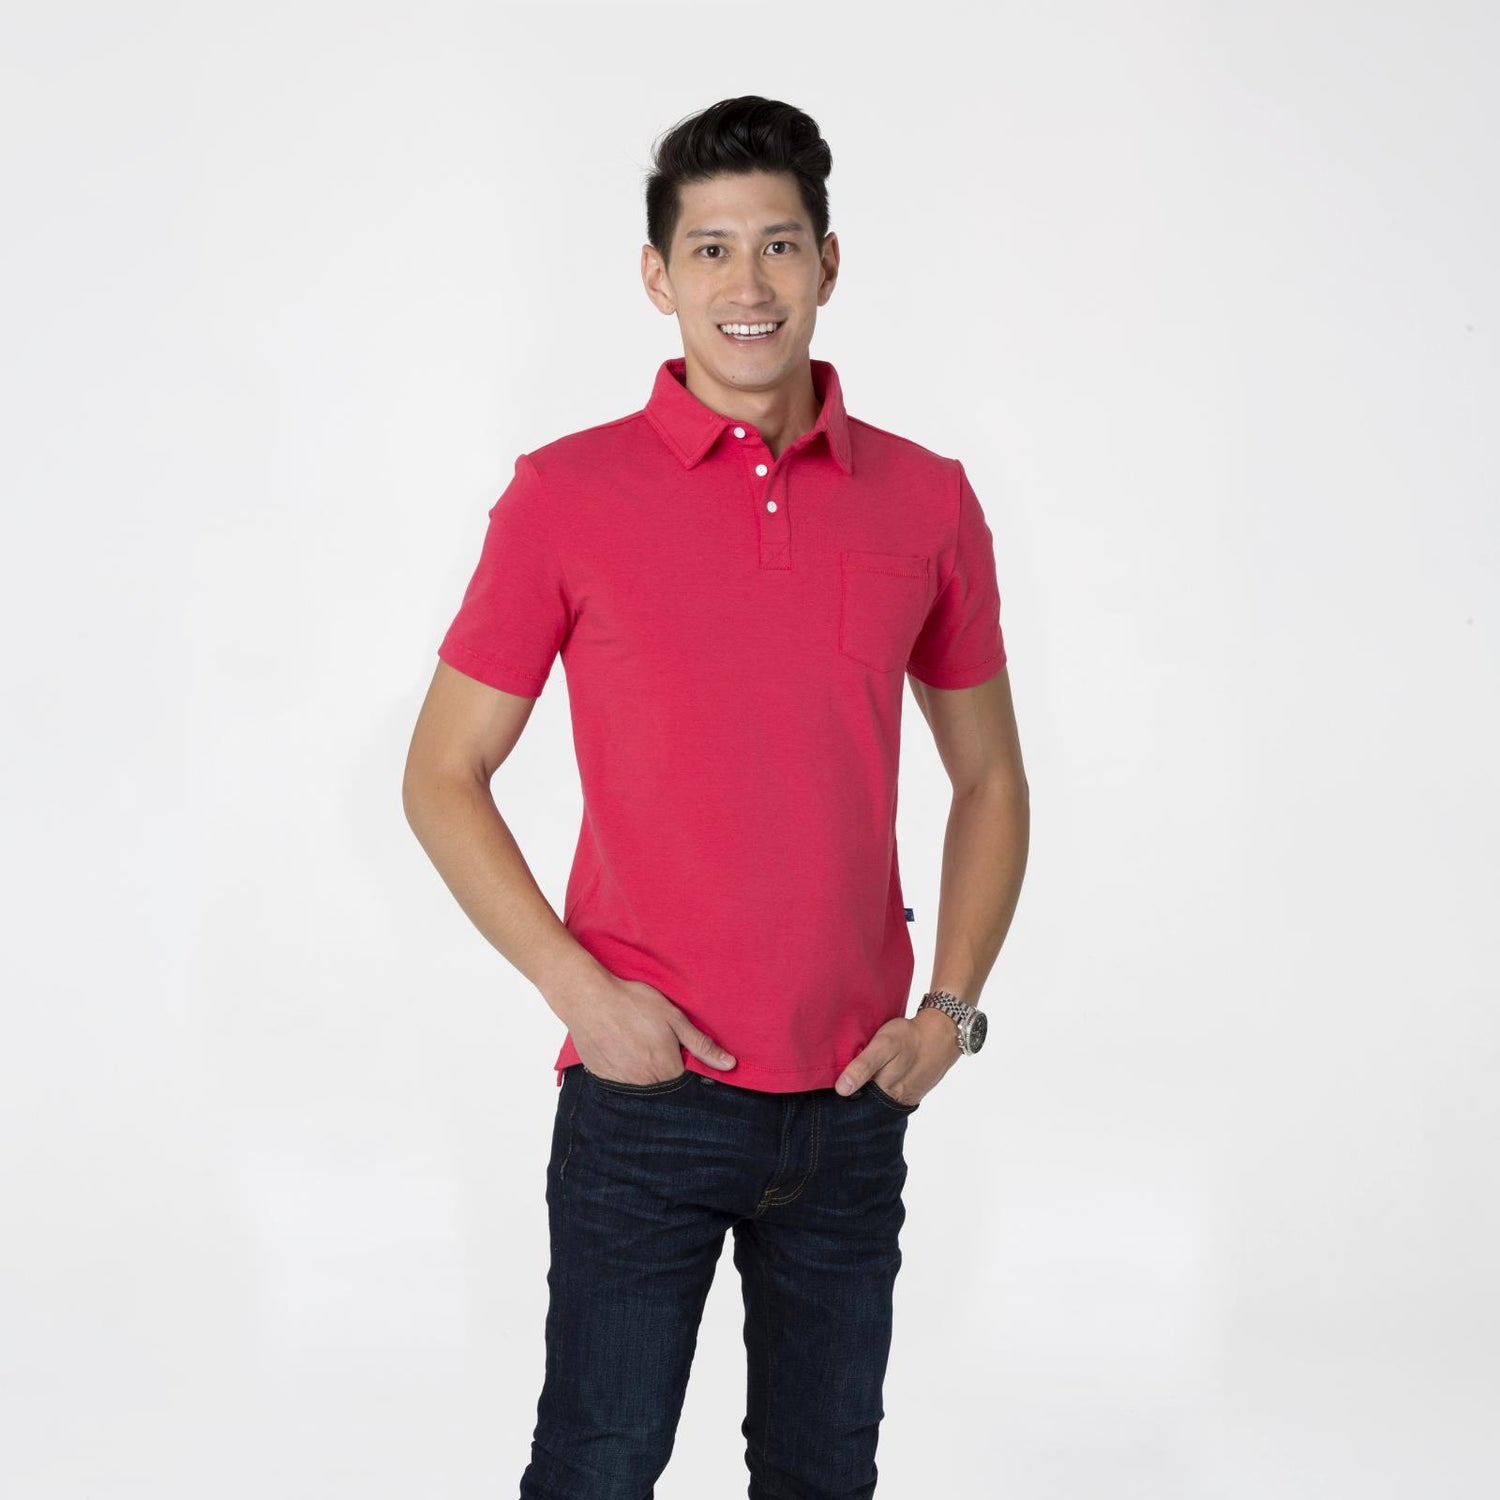 Men's Short Sleeve Luxe Jersey Polo in Flag Red